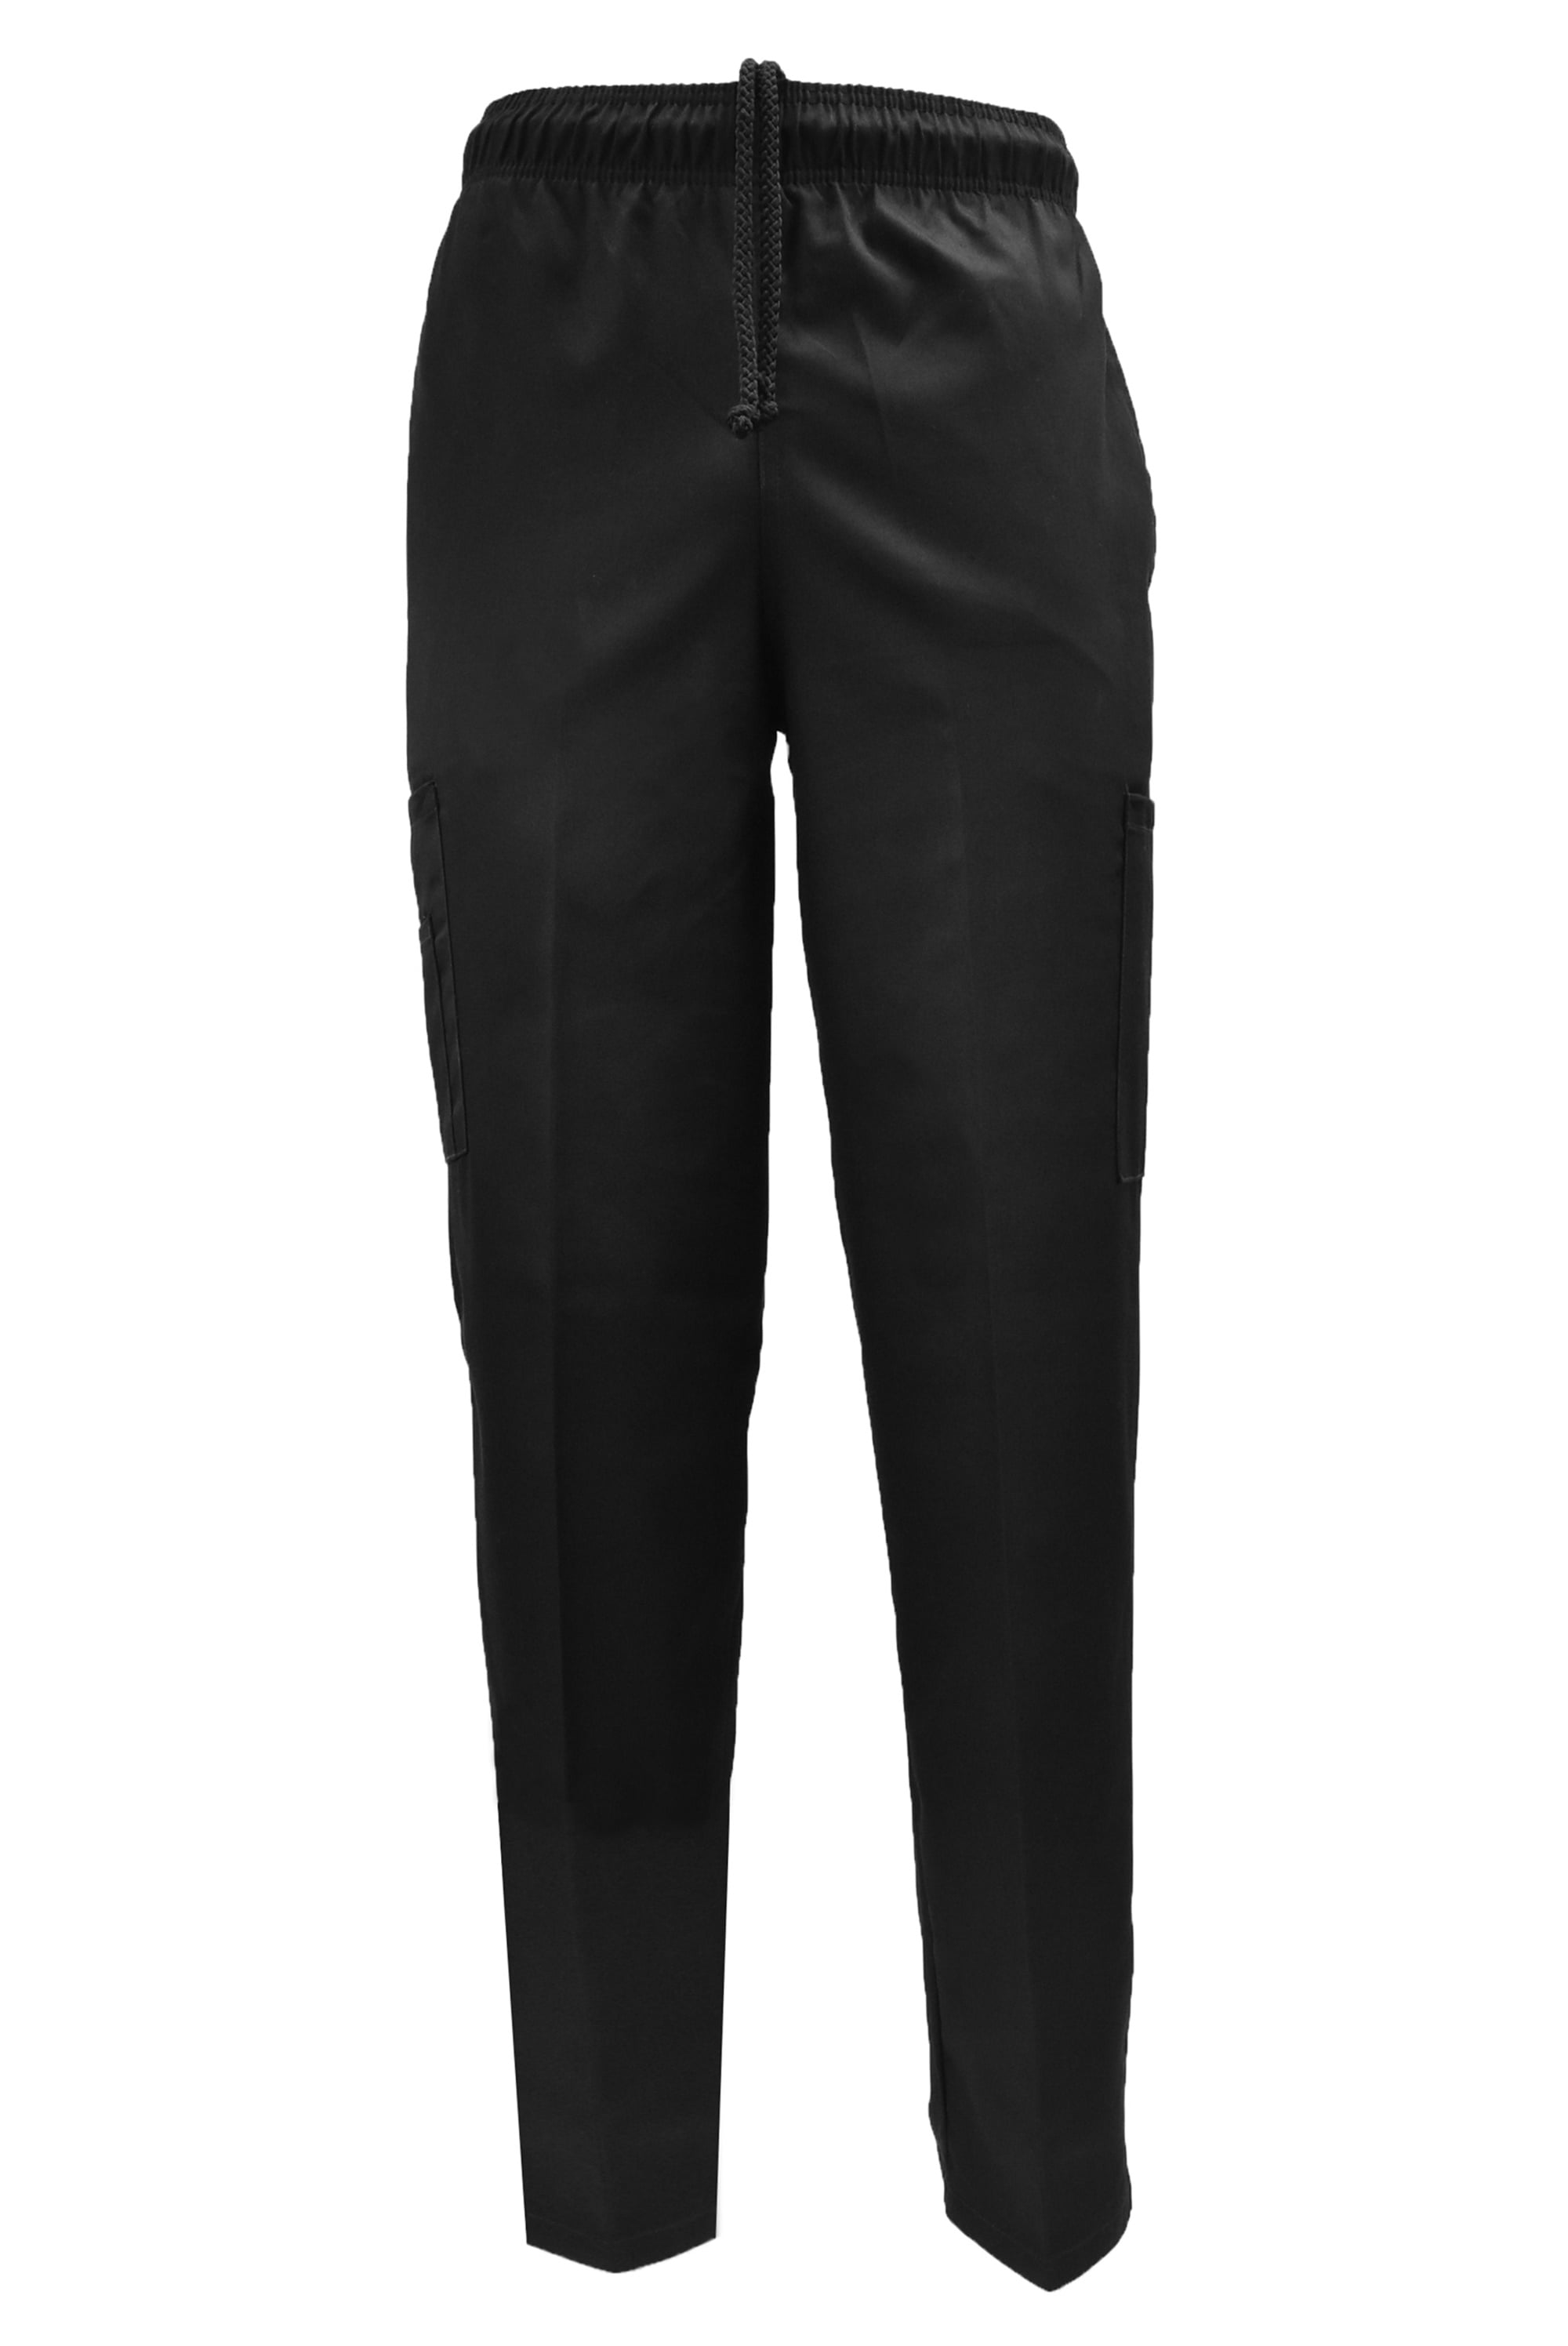 Natural Uniforms Classic 6 Pocket Black Chef Pants with Multi-Pack Quantities Available 